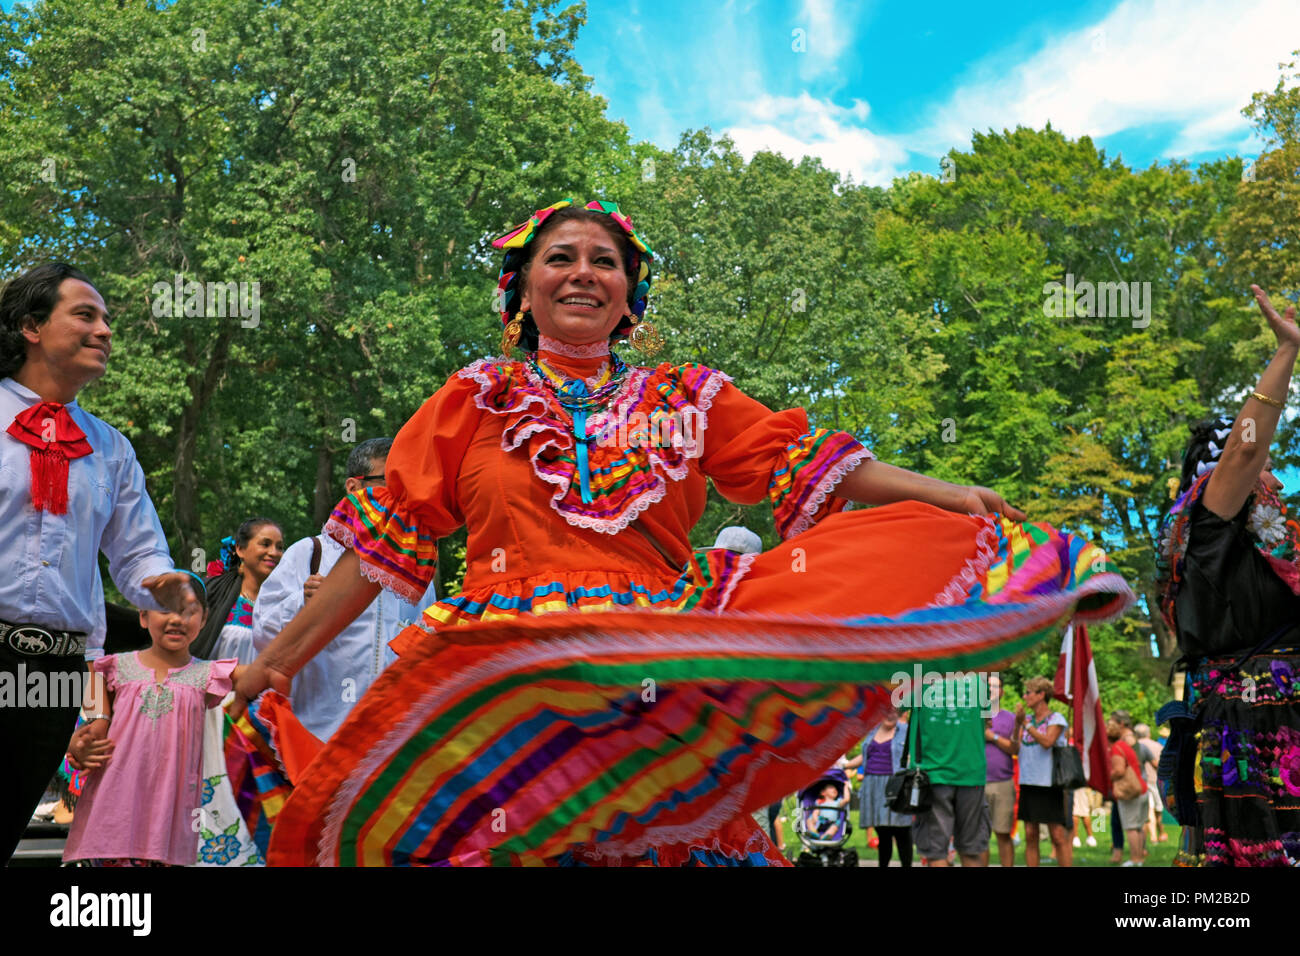 Cleveland, Ohio, USA.  16th Sept, 2018.  A woman of Mexican heritage takes part in the Parade of Flags as part of the 73rd Annual One World Day celebration in Cleveland, Ohio, USA.  Dozens of ethnic communities found throughout the Cleveland, Ohio, USA area come together each year for a celebration of diversity, cross-cultural learning, ethnic pride, and community.  The event is held in the Cultural Gardens of Rockefeller Park in which dozens of ethnic communities that have immigrated to Northeast Ohio maintain gardens representing their cultural heritage. Credit: Mark Kanning/Alamy Live News Stock Photo